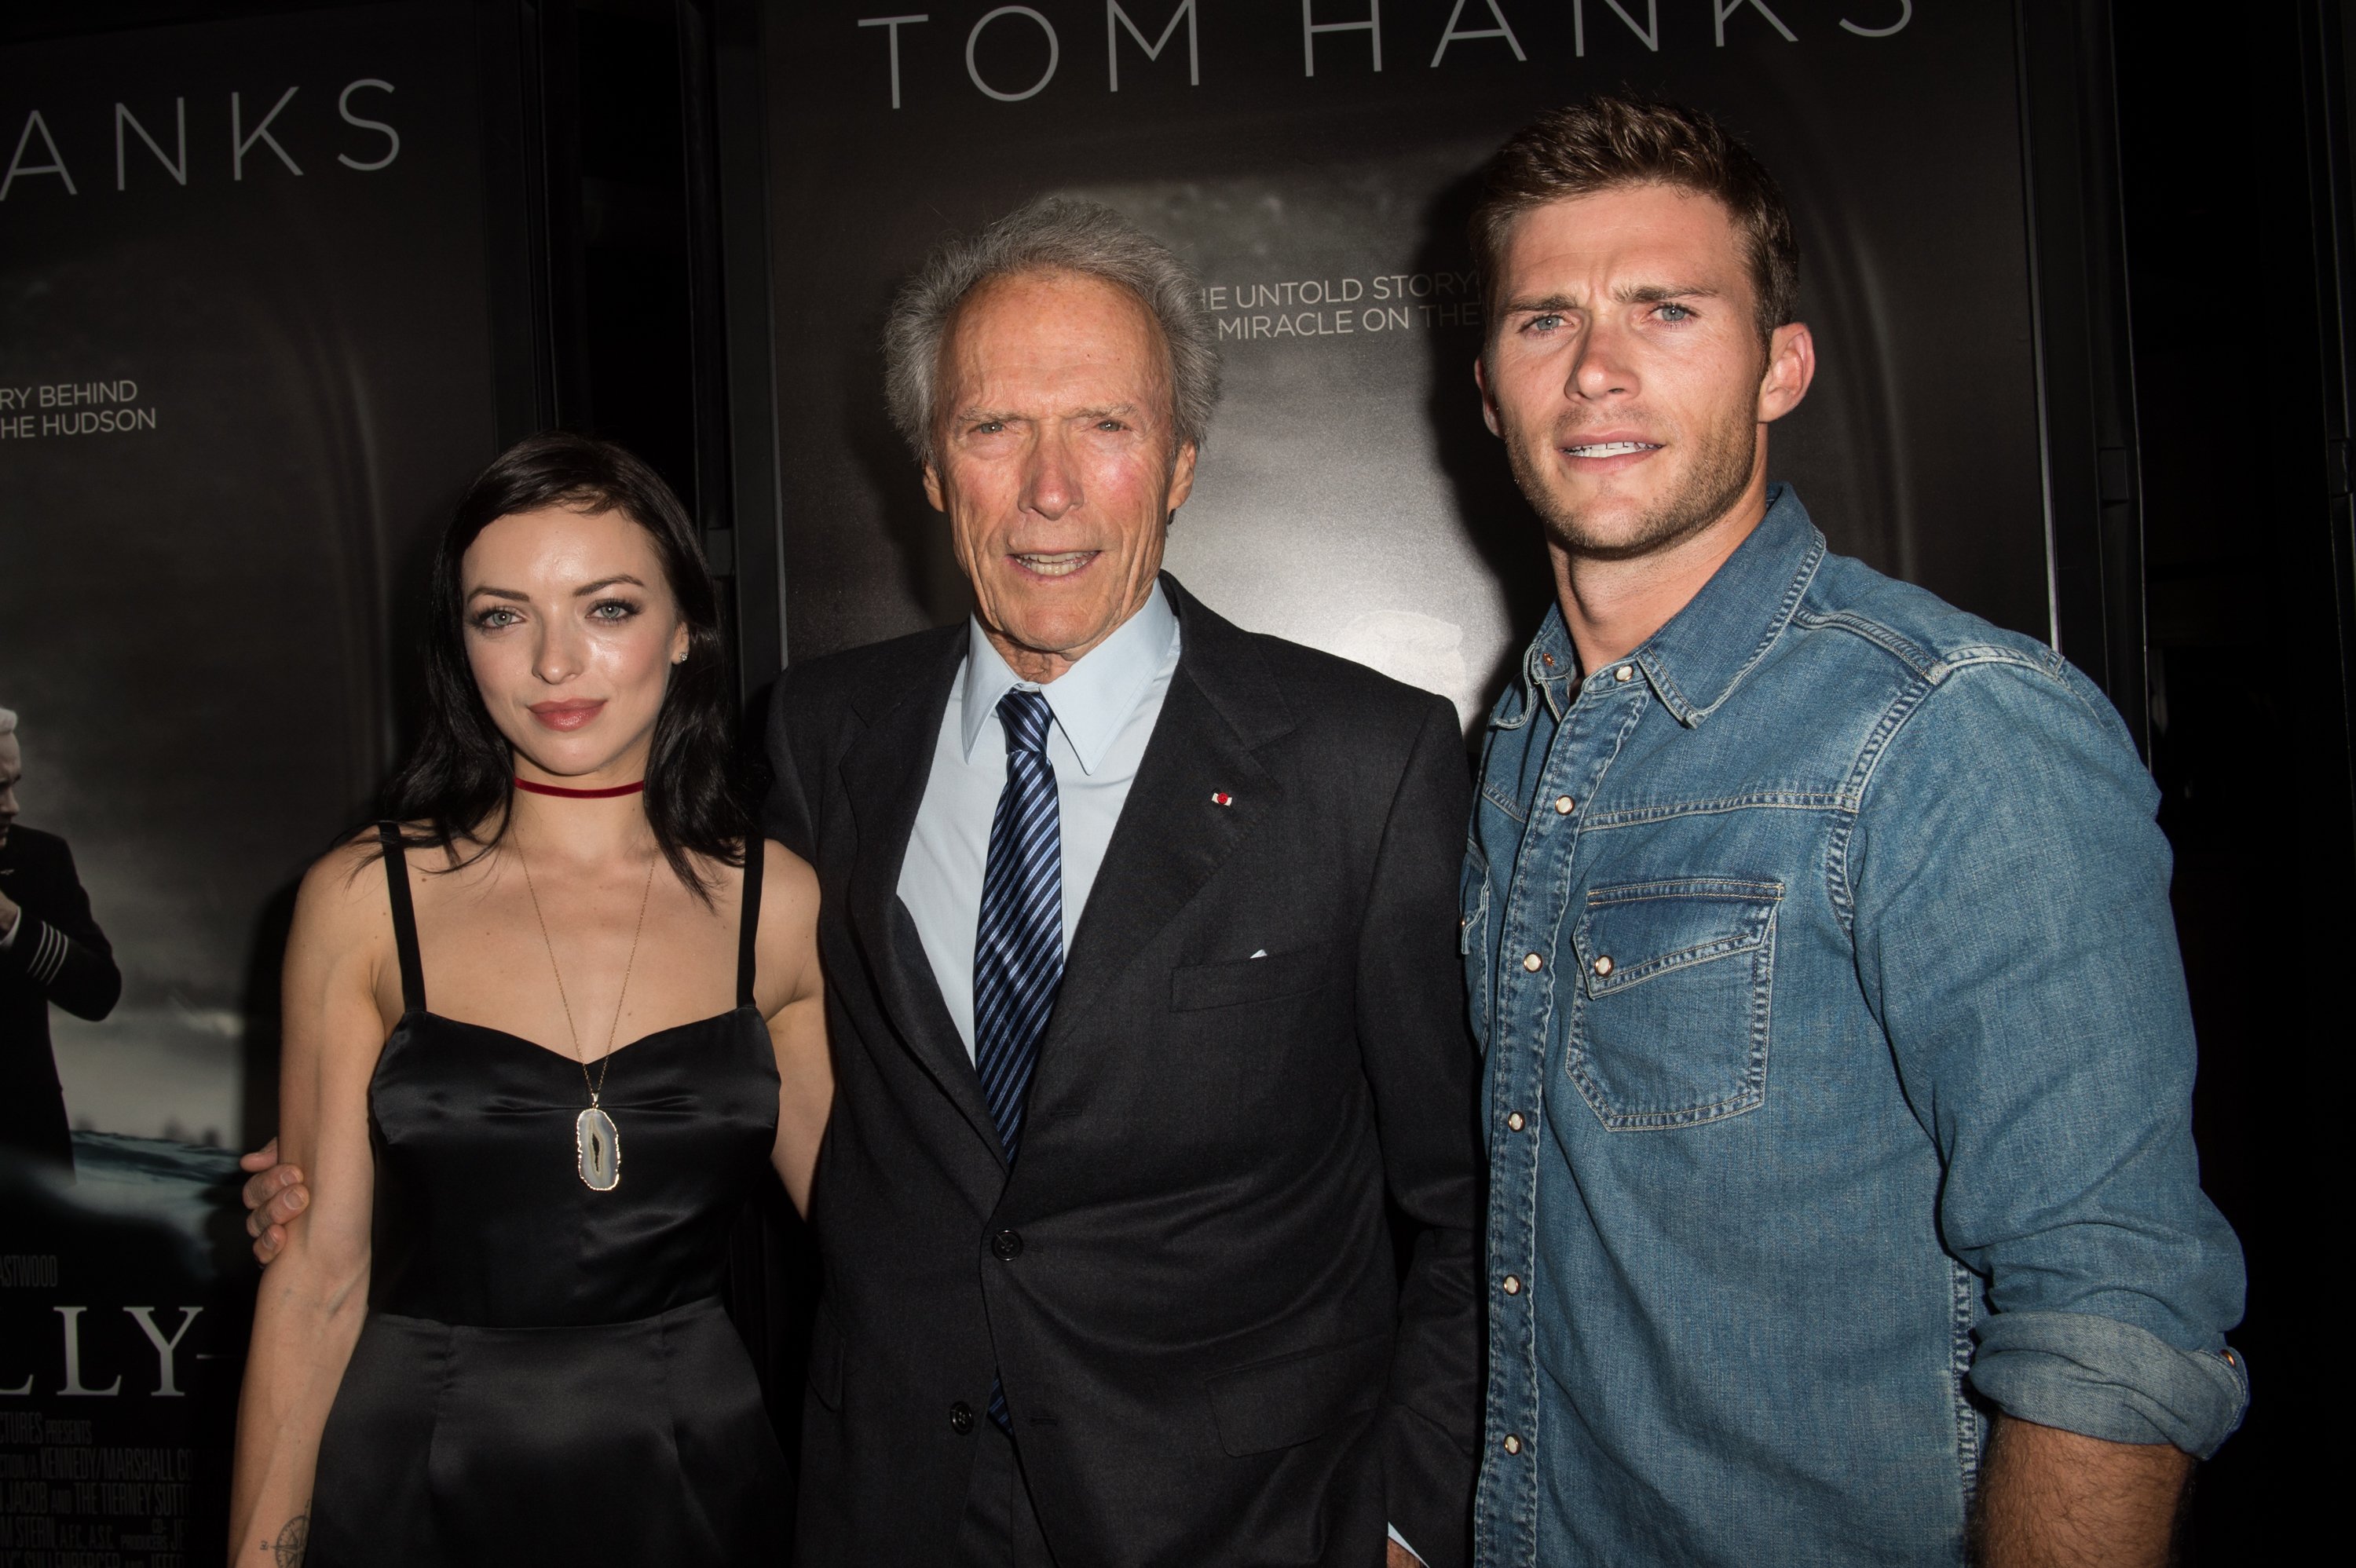 Clint Eastwood and his kids Kyle Eastwood, Alison Eastwood and Scott Eastwood arrive for the world premiere of "The 15:17 to Paris" on February 8, 2018. | Photo: Getty Images